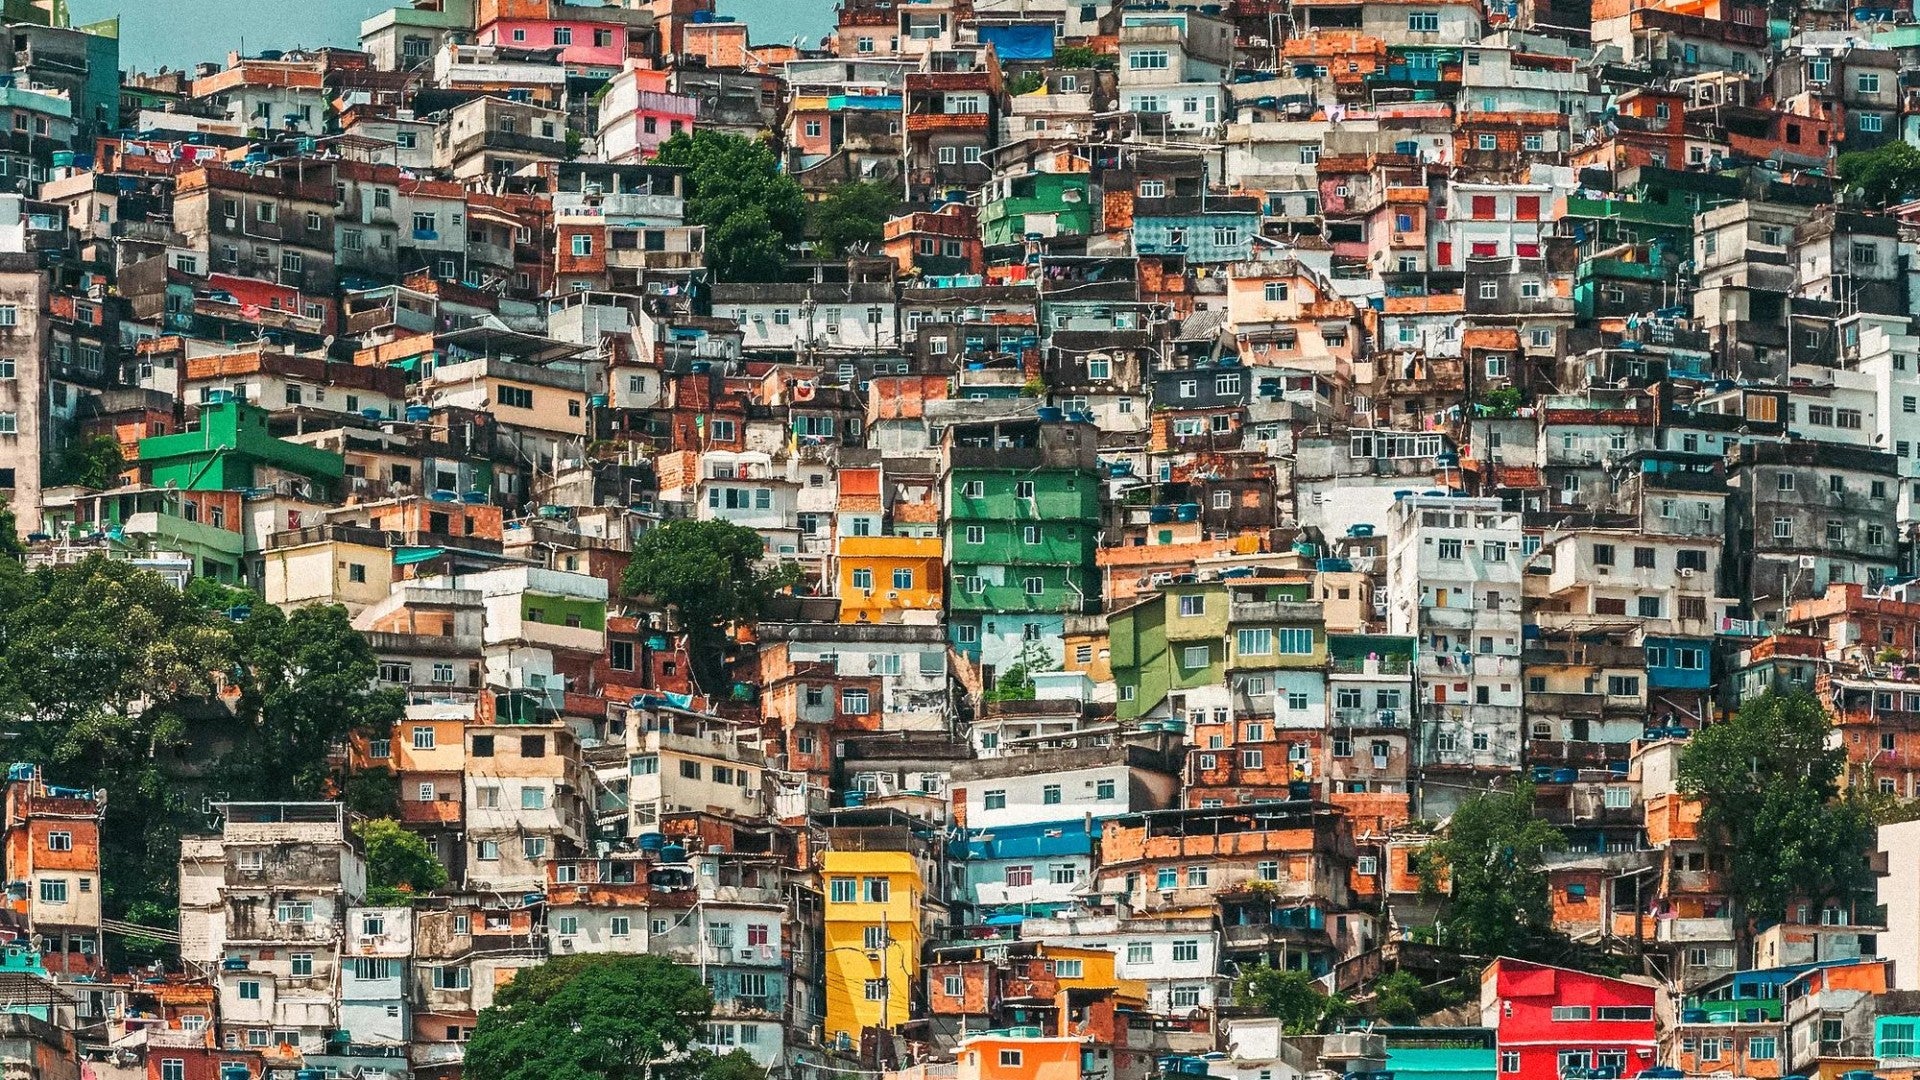 Rio de Janeiro's Rocinha is The largest shanty town in South America